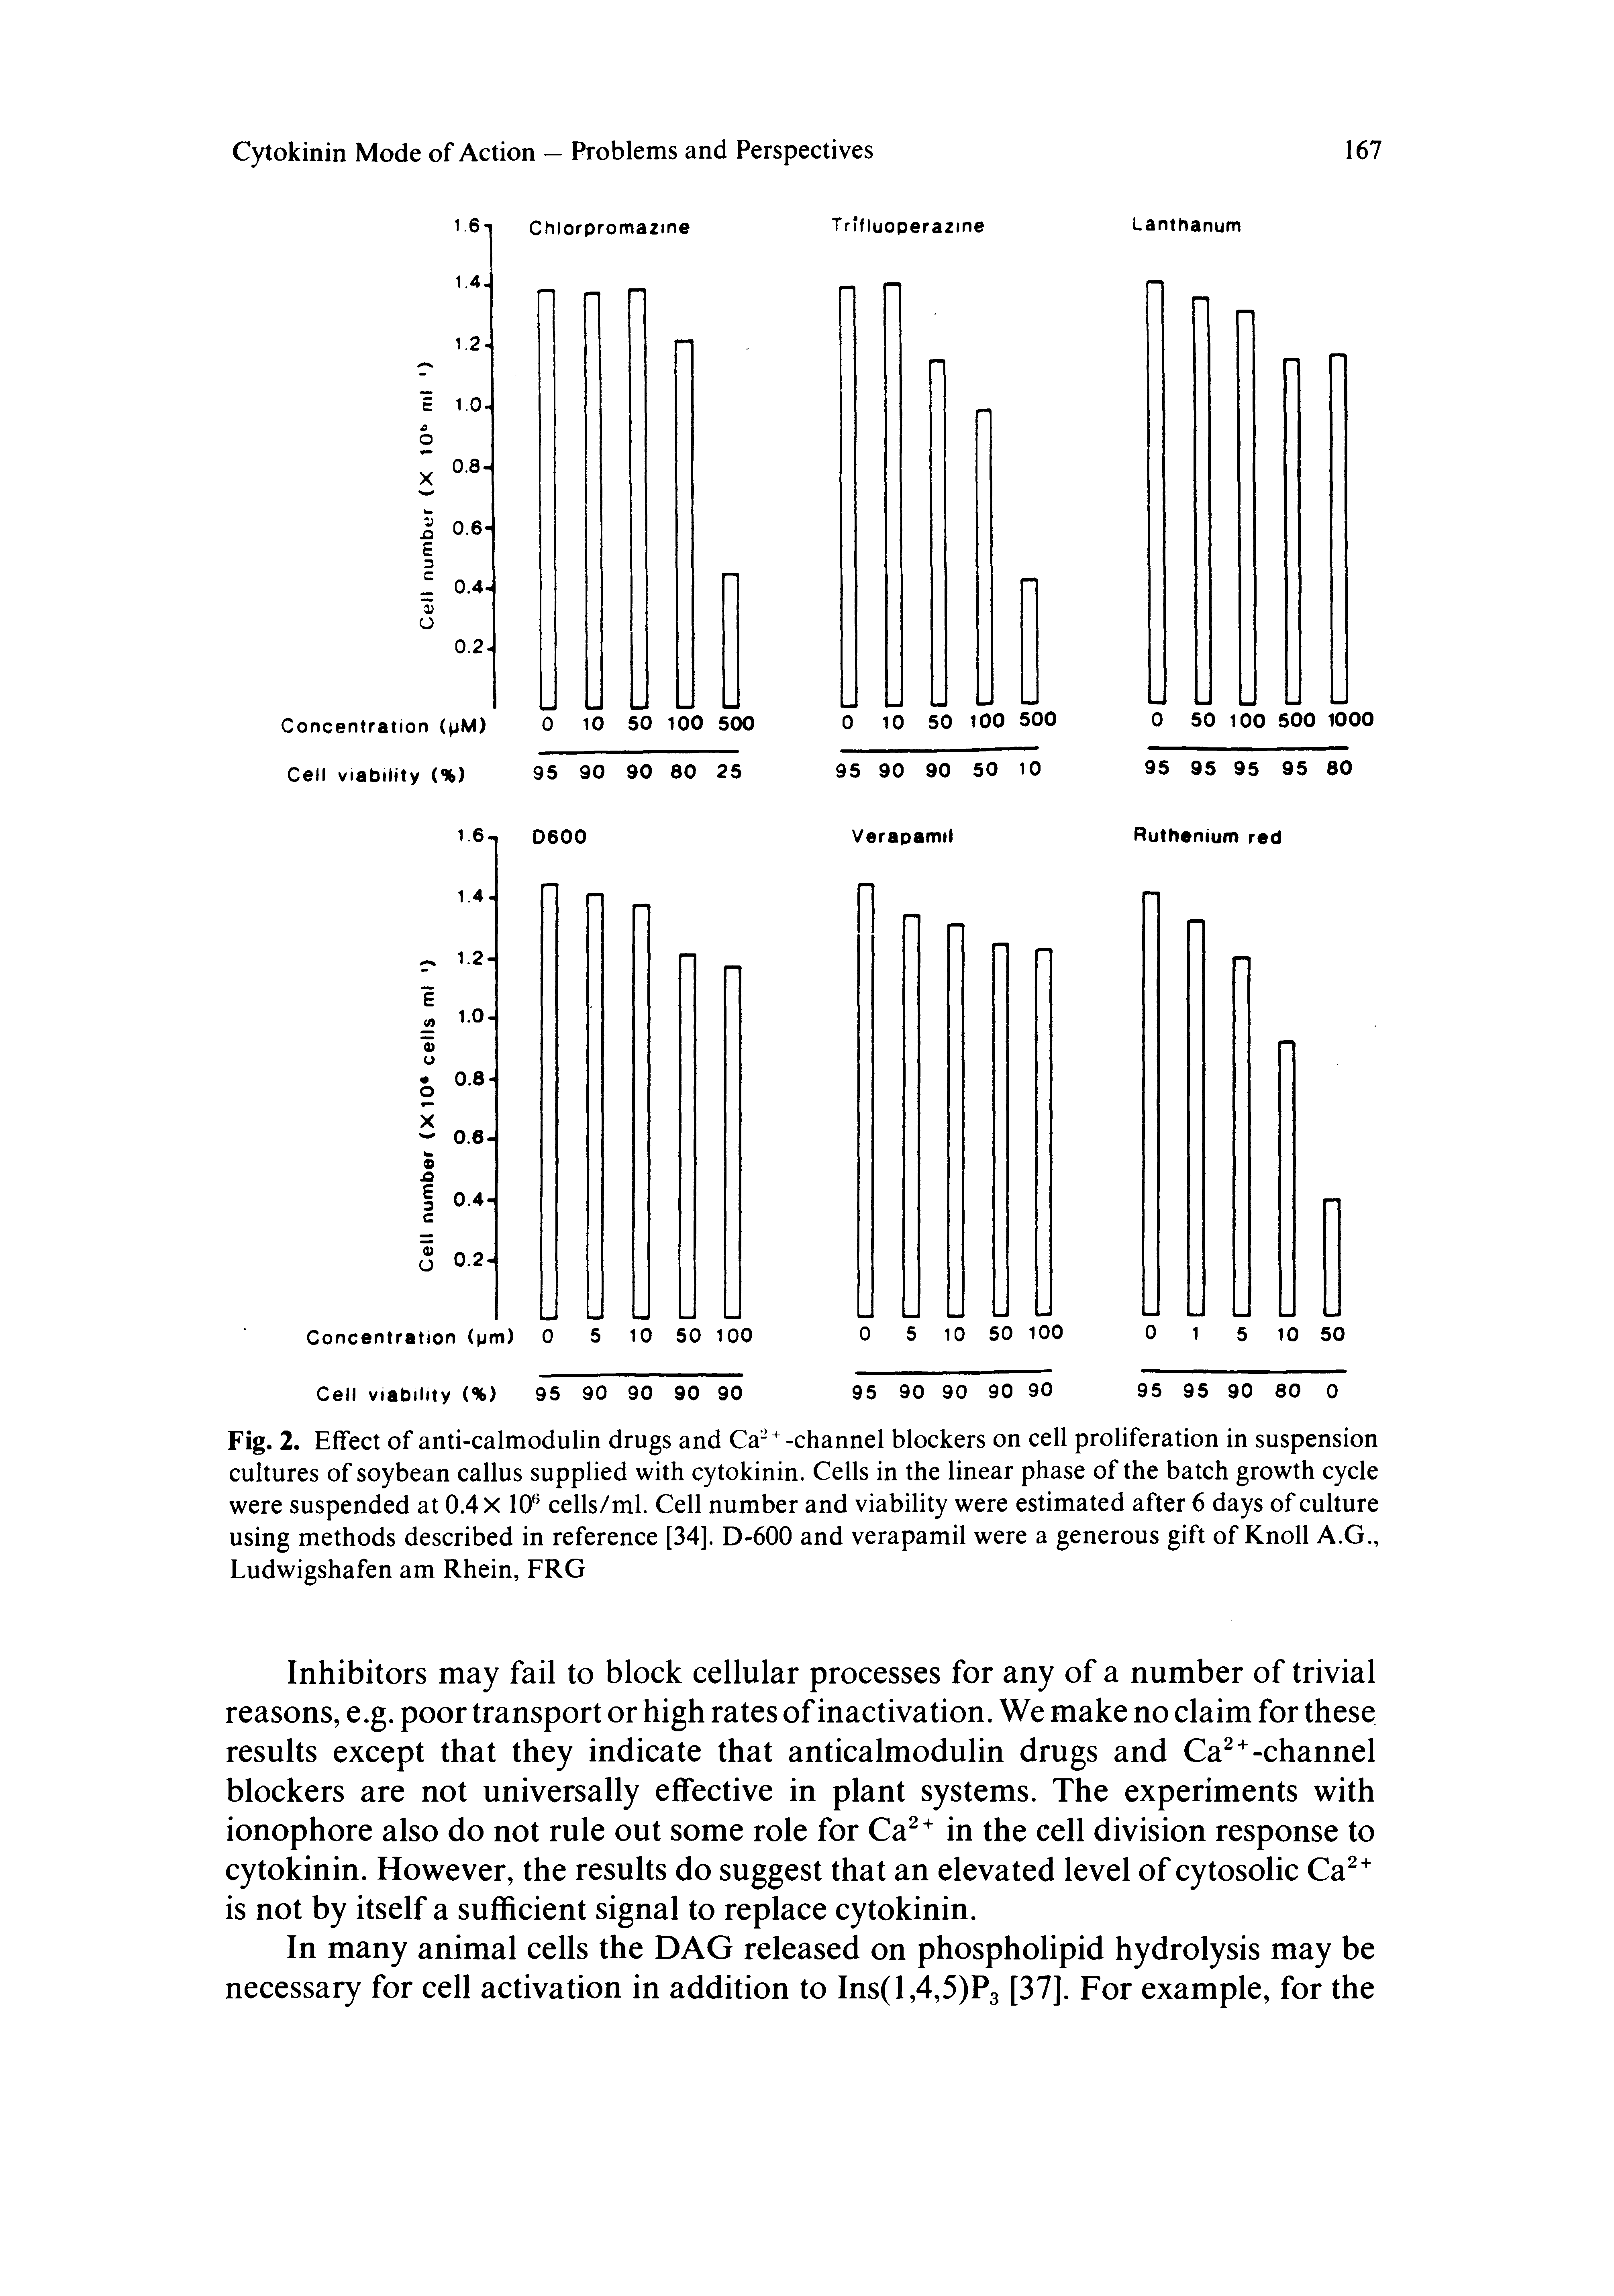 Fig. 2. Effect of anti-calmodulin drugs and Ca- + -channel blockers on cell proliferation in suspension cultures of soybean callus supplied with cytokinin. Cells in the linear phase of the batch growth cycle were suspended at 0.4 X 10 cells/ml. Cell number and viability were estimated after 6 days of culture using methods described in reference [34]. D-600 and verapamil were a generous gift of Knoll A.G., Ludwigshafen am Rhein, FRG...